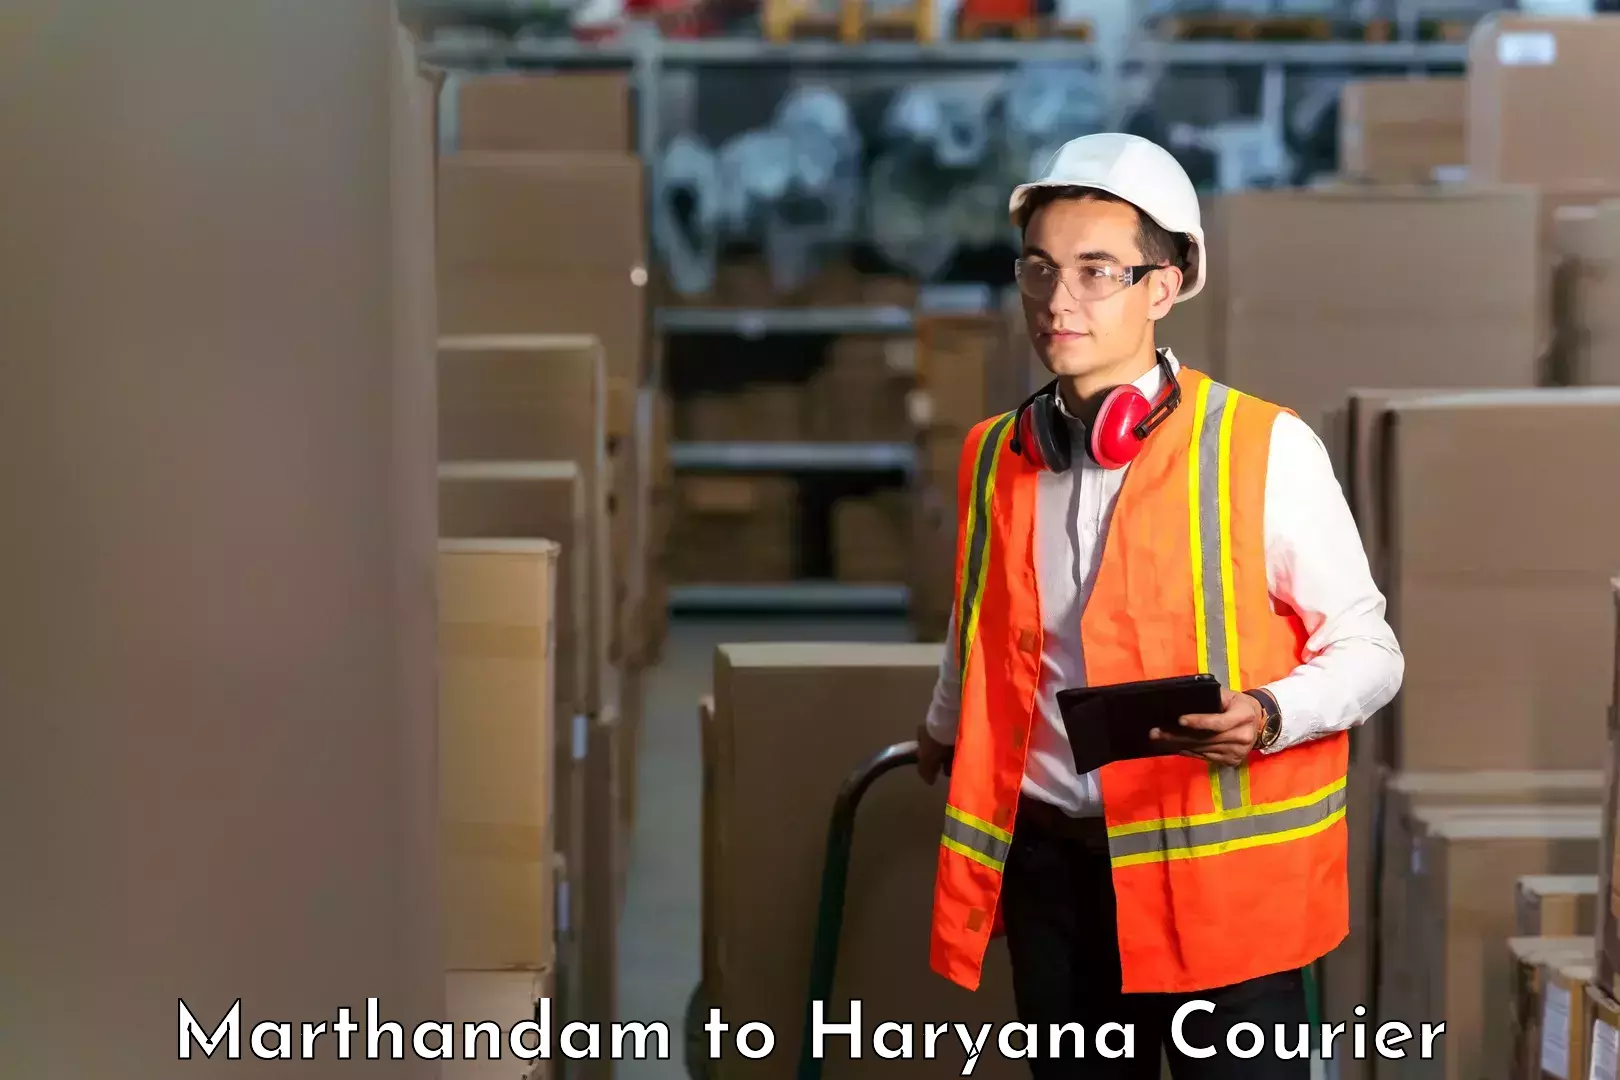 State-of-the-art courier technology Marthandam to Haryana